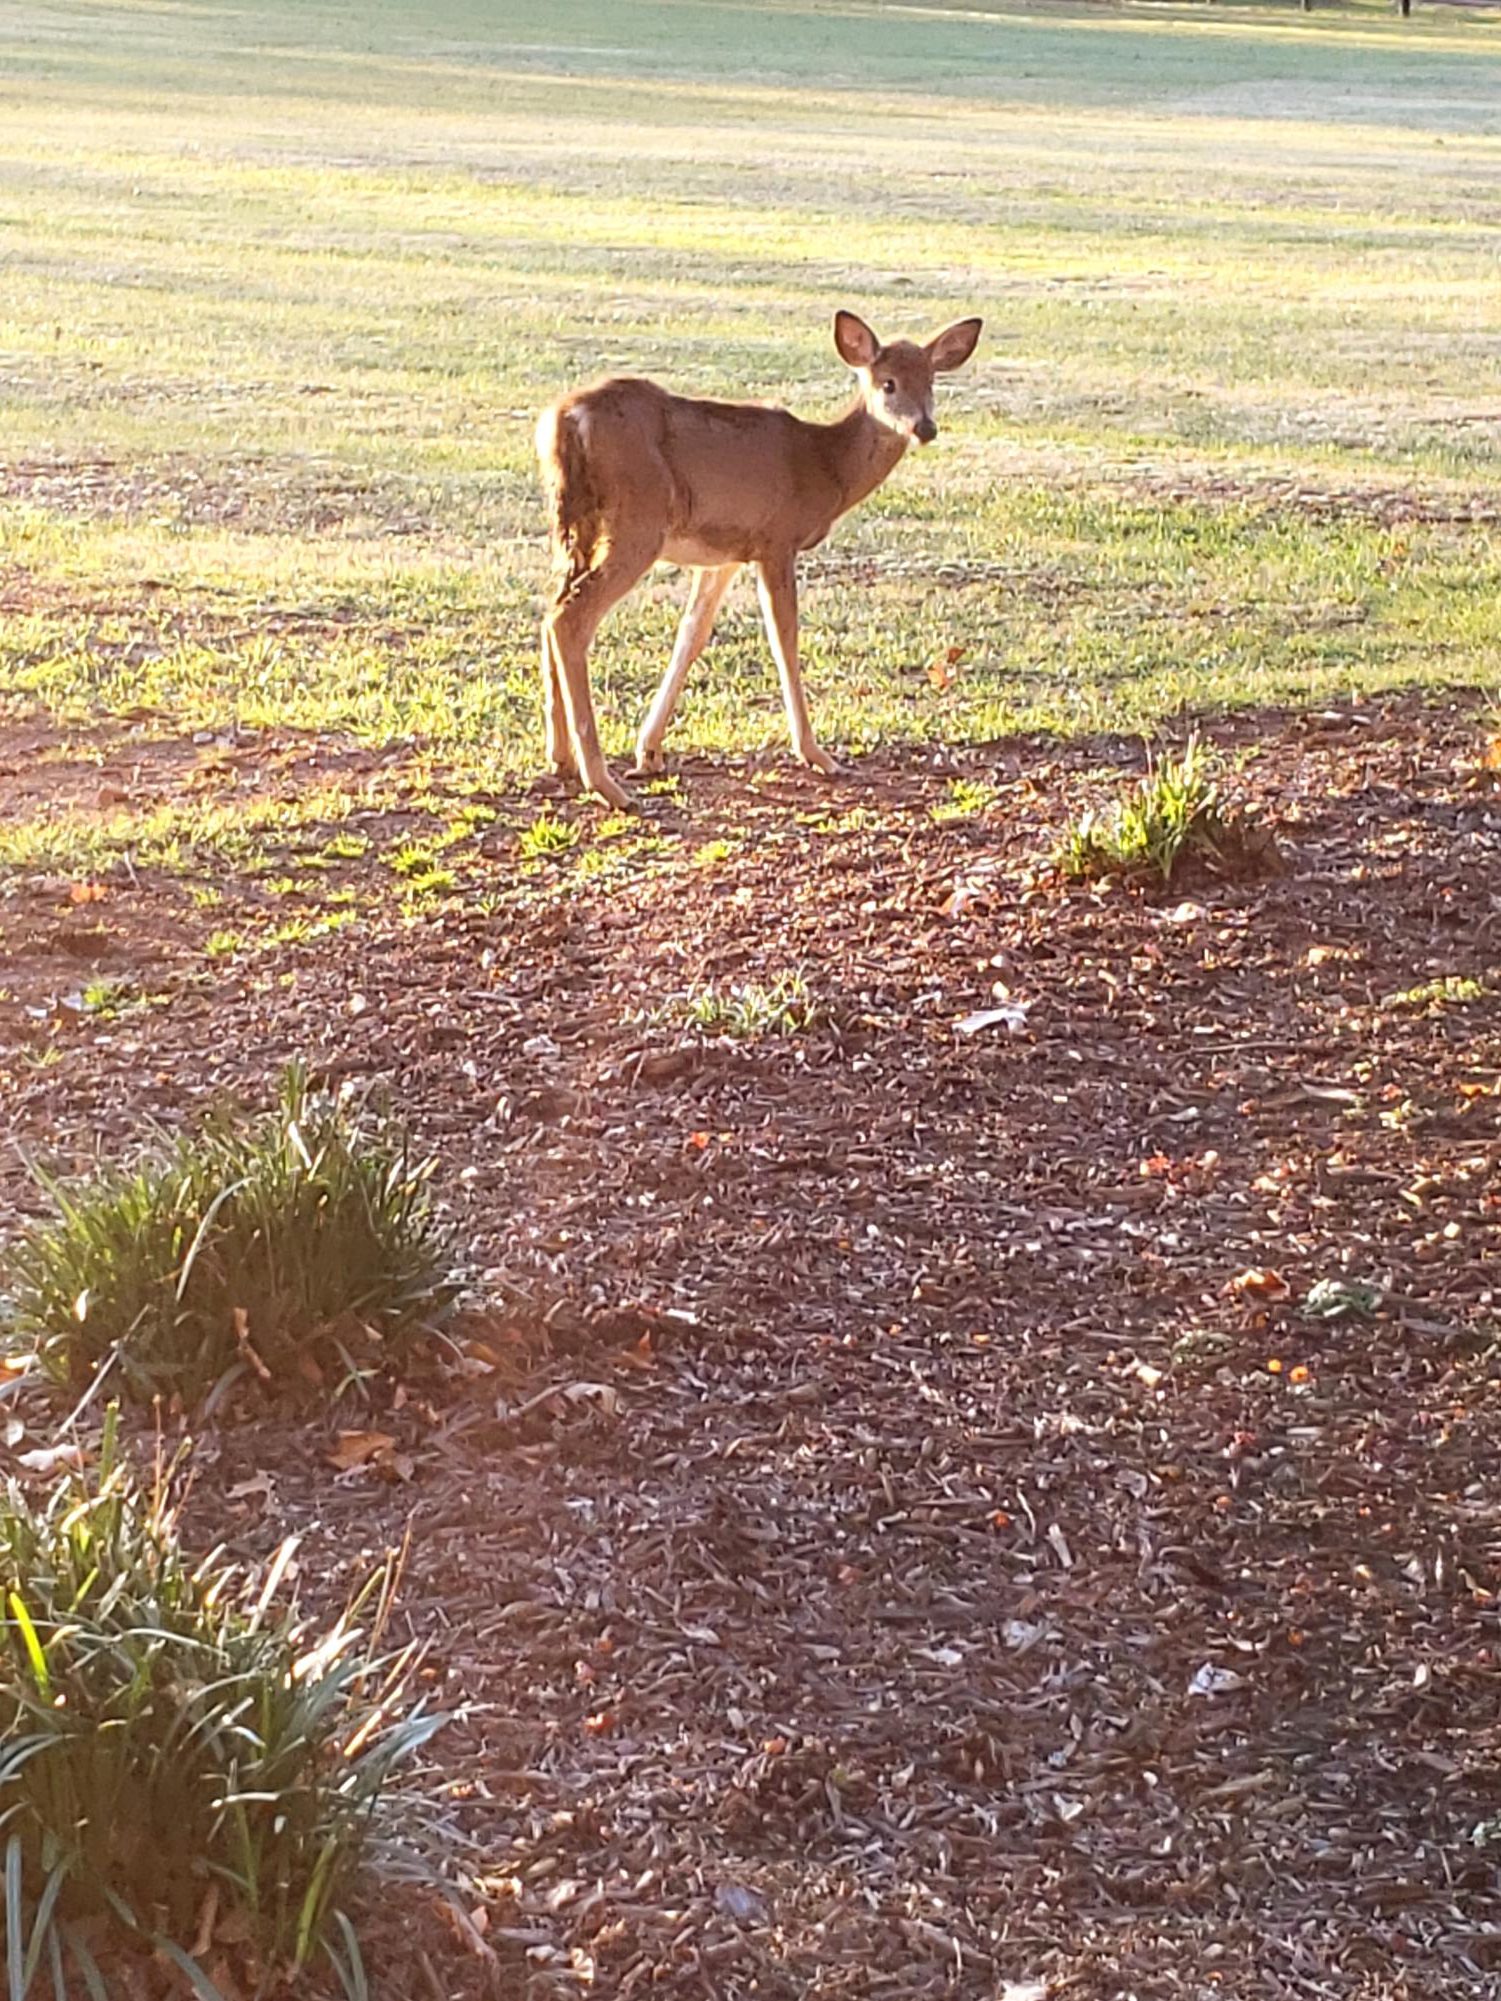 A white-tailed deer. Photo provided by Jillian Lewis.